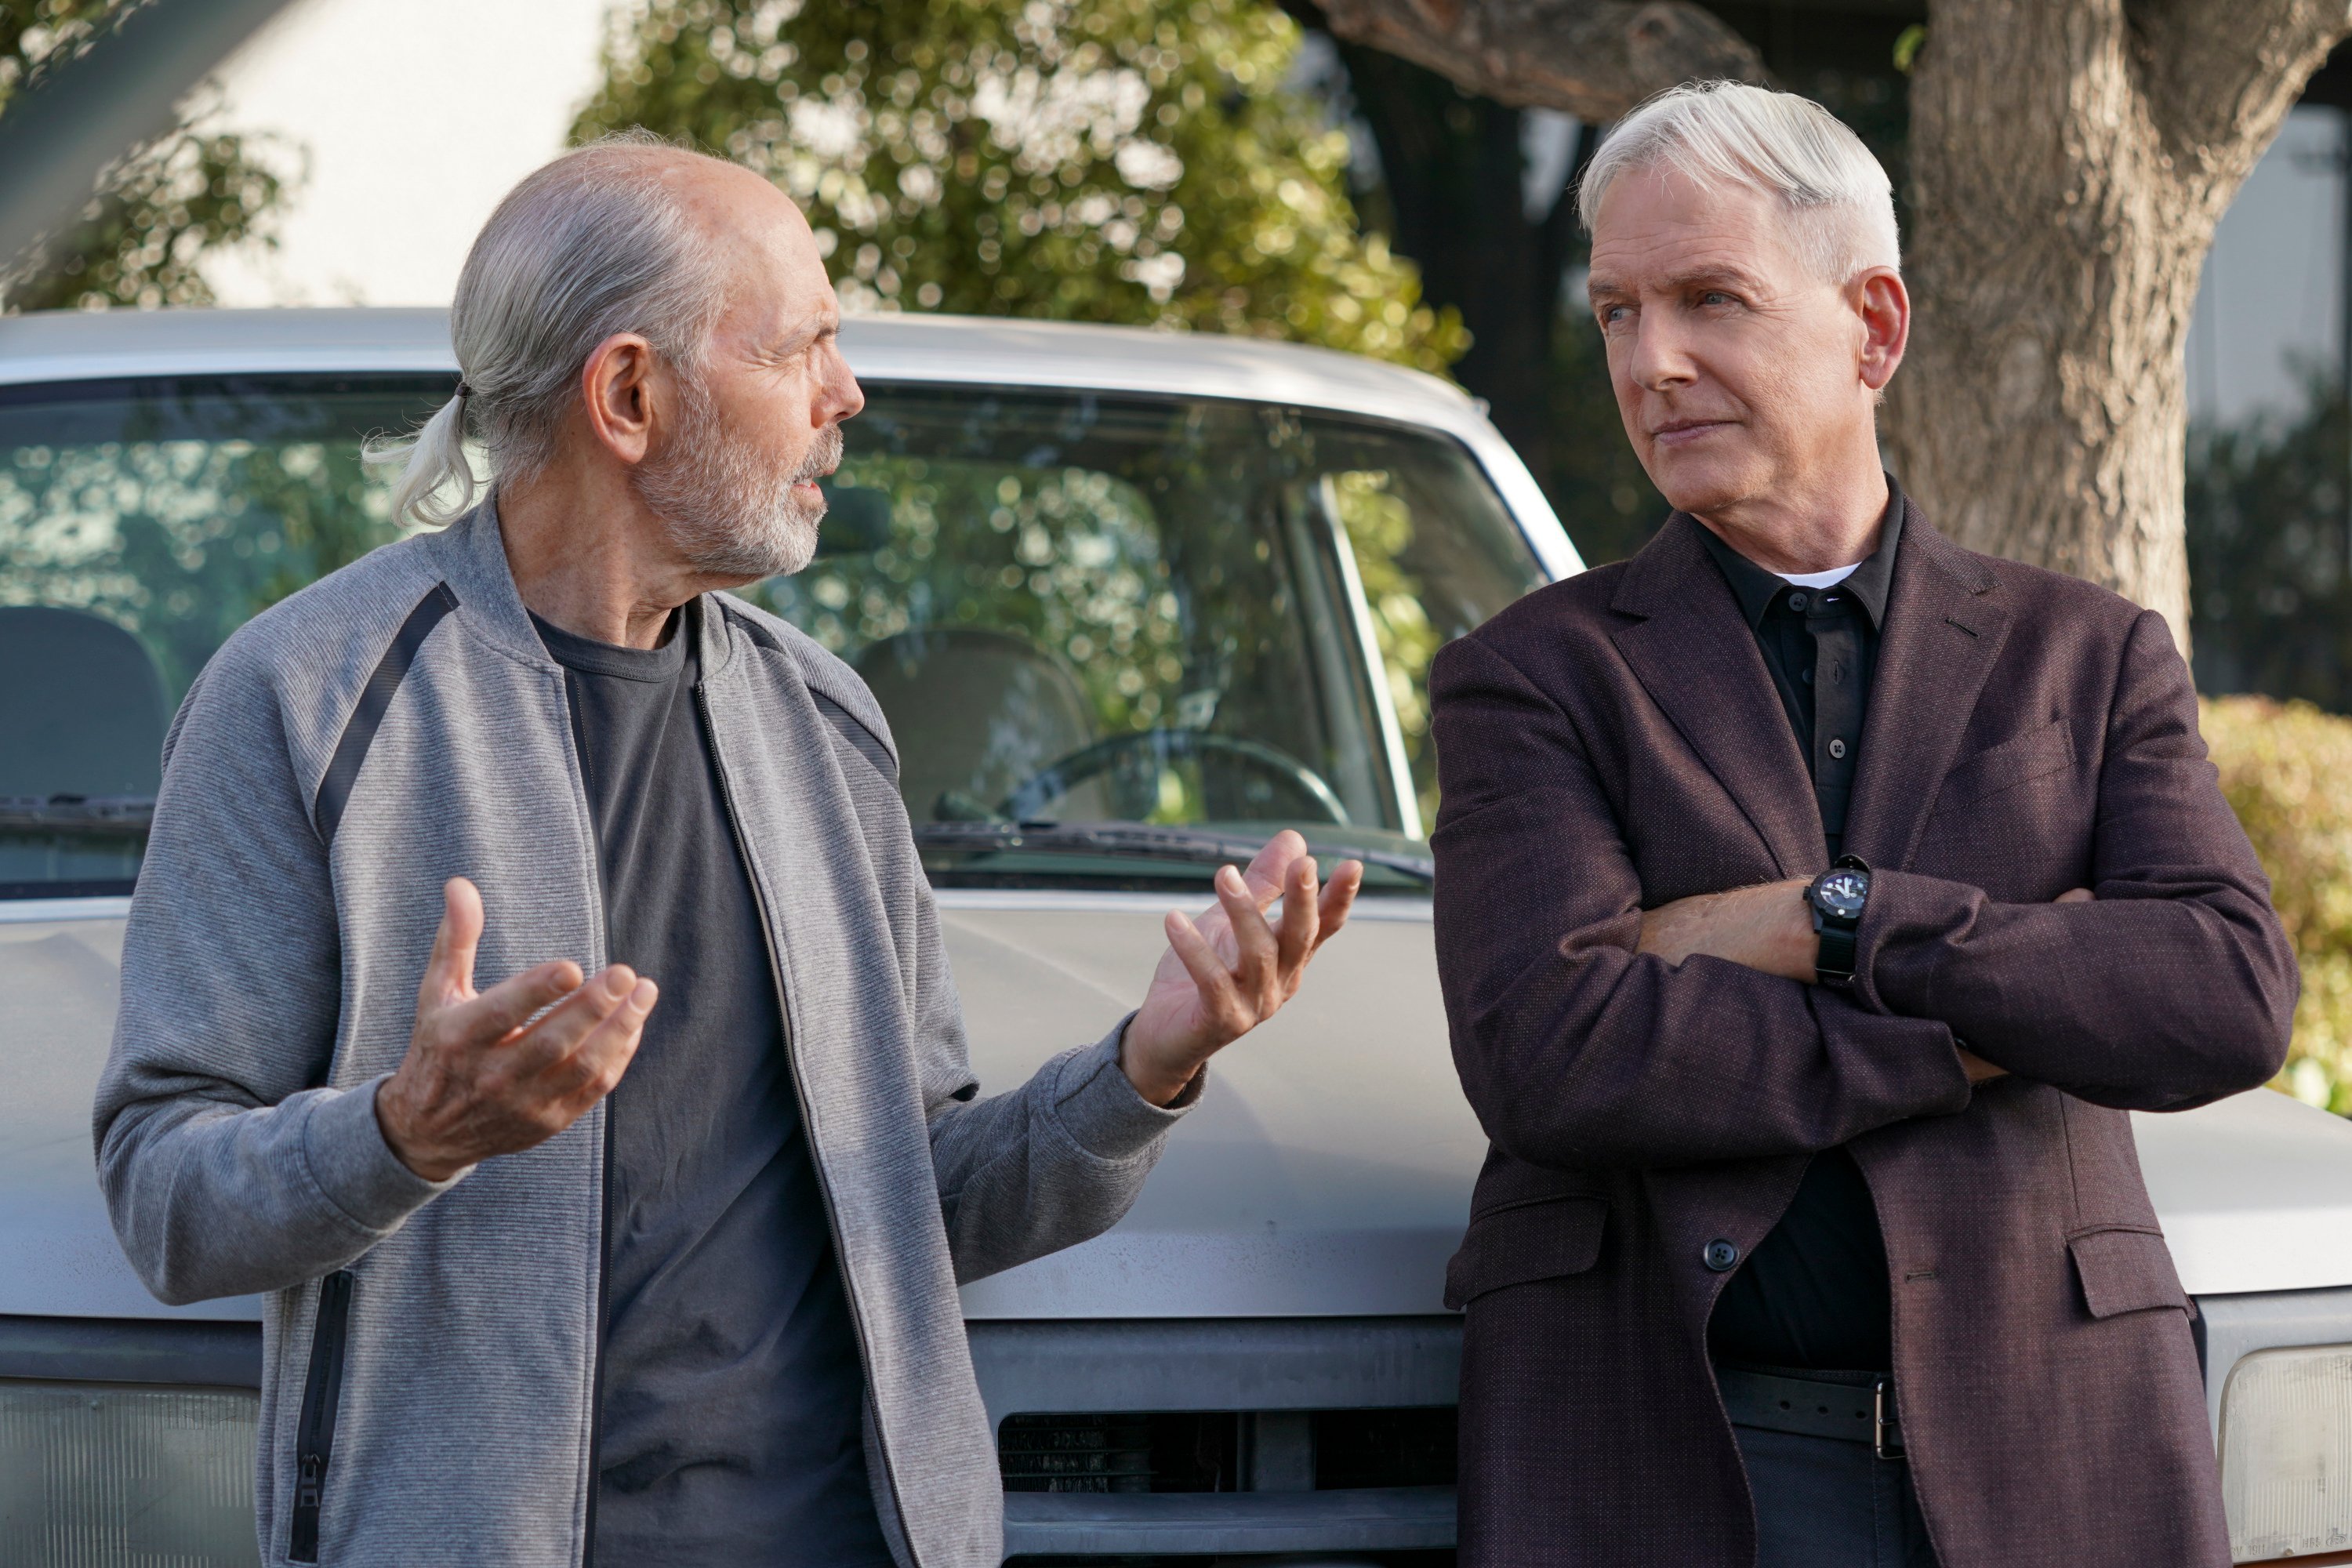 Joe Spano as Tobias T.C. Fornell and Mark Harmon as NCIS Special Agent Leroy Jethro Gibbs | Sonja Flemming/CBS via Getty Images